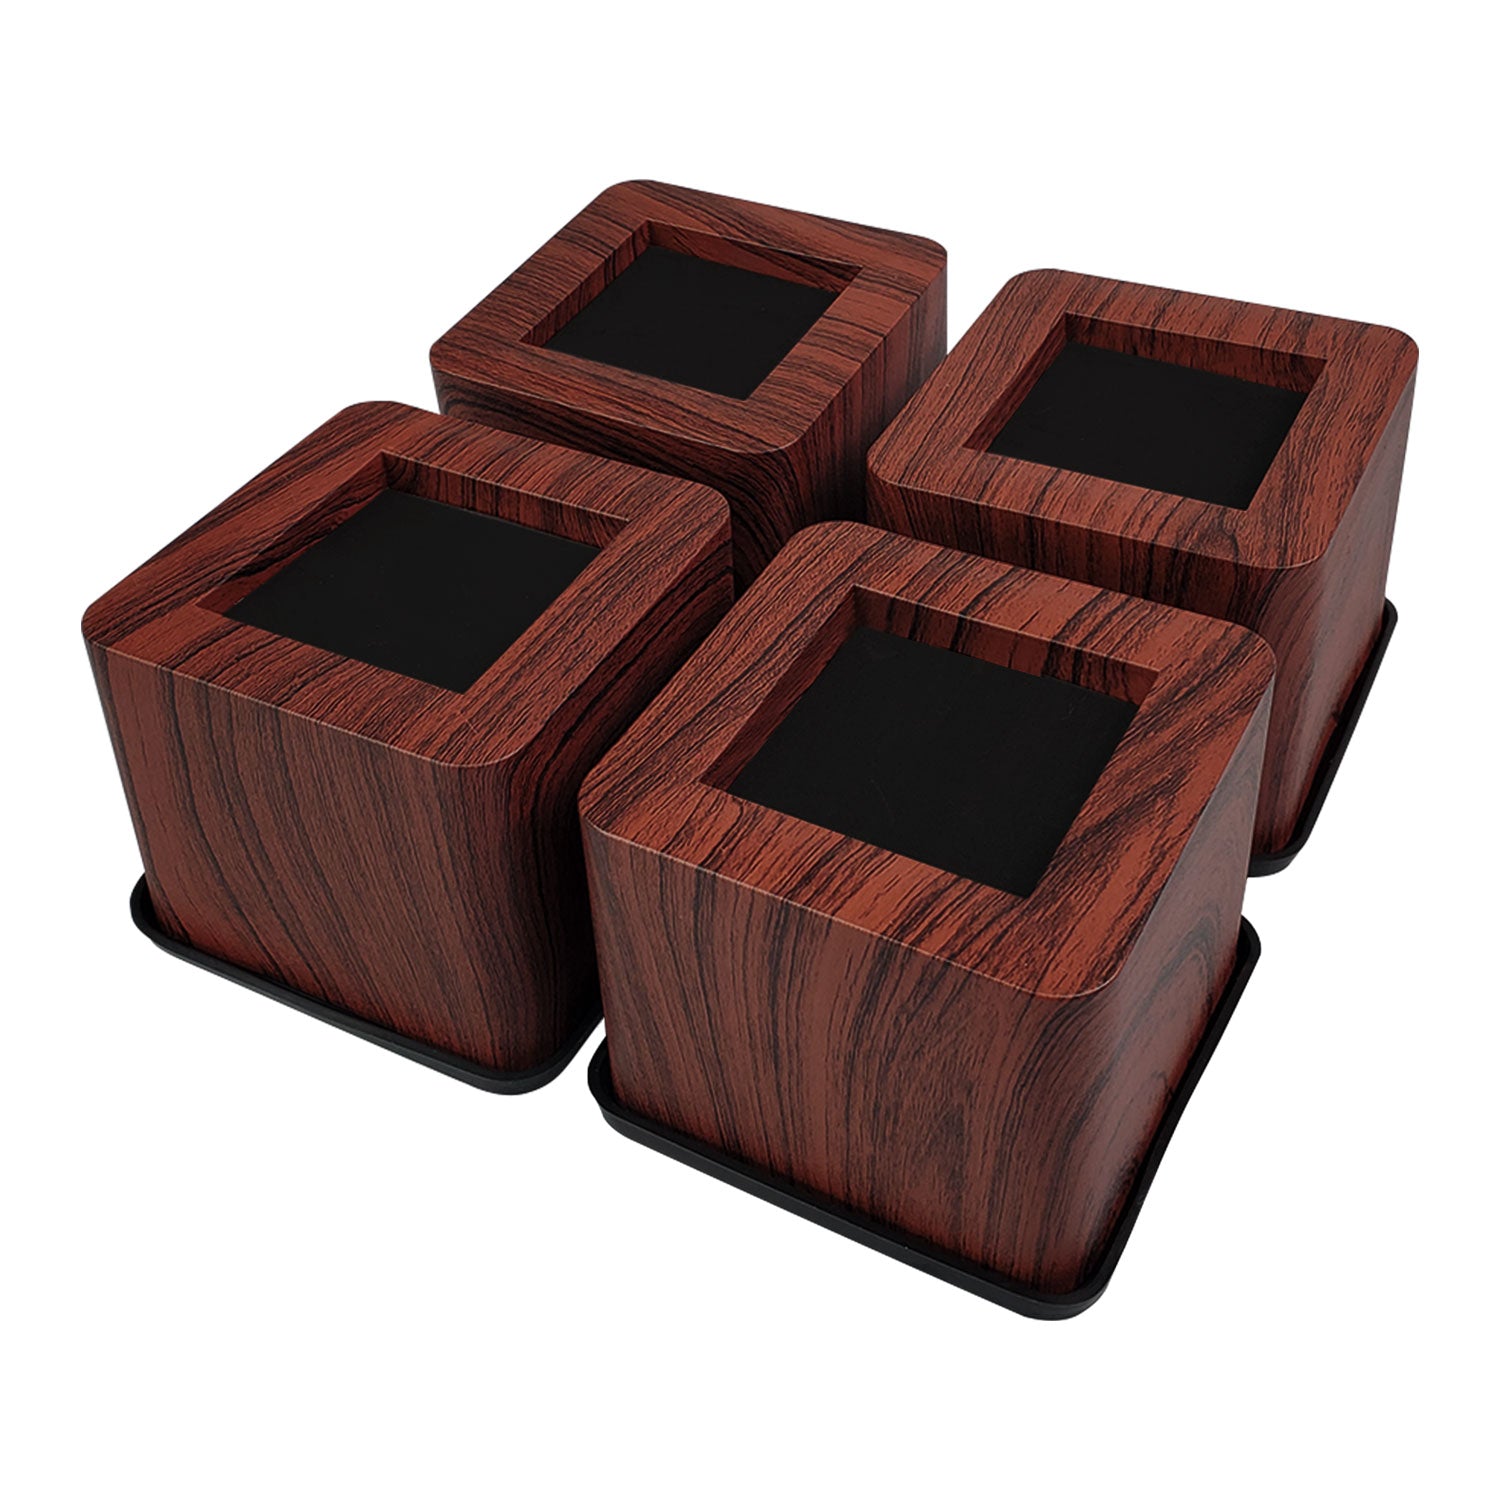 MIIX HOOM- Heavy Duty 3 inch Bed Risers Cover Wooded Color for Furniture Table Sofa Desk Couch Dark Brown,Dark Wood Chocolate Colour,1 Set of 4 Pcs